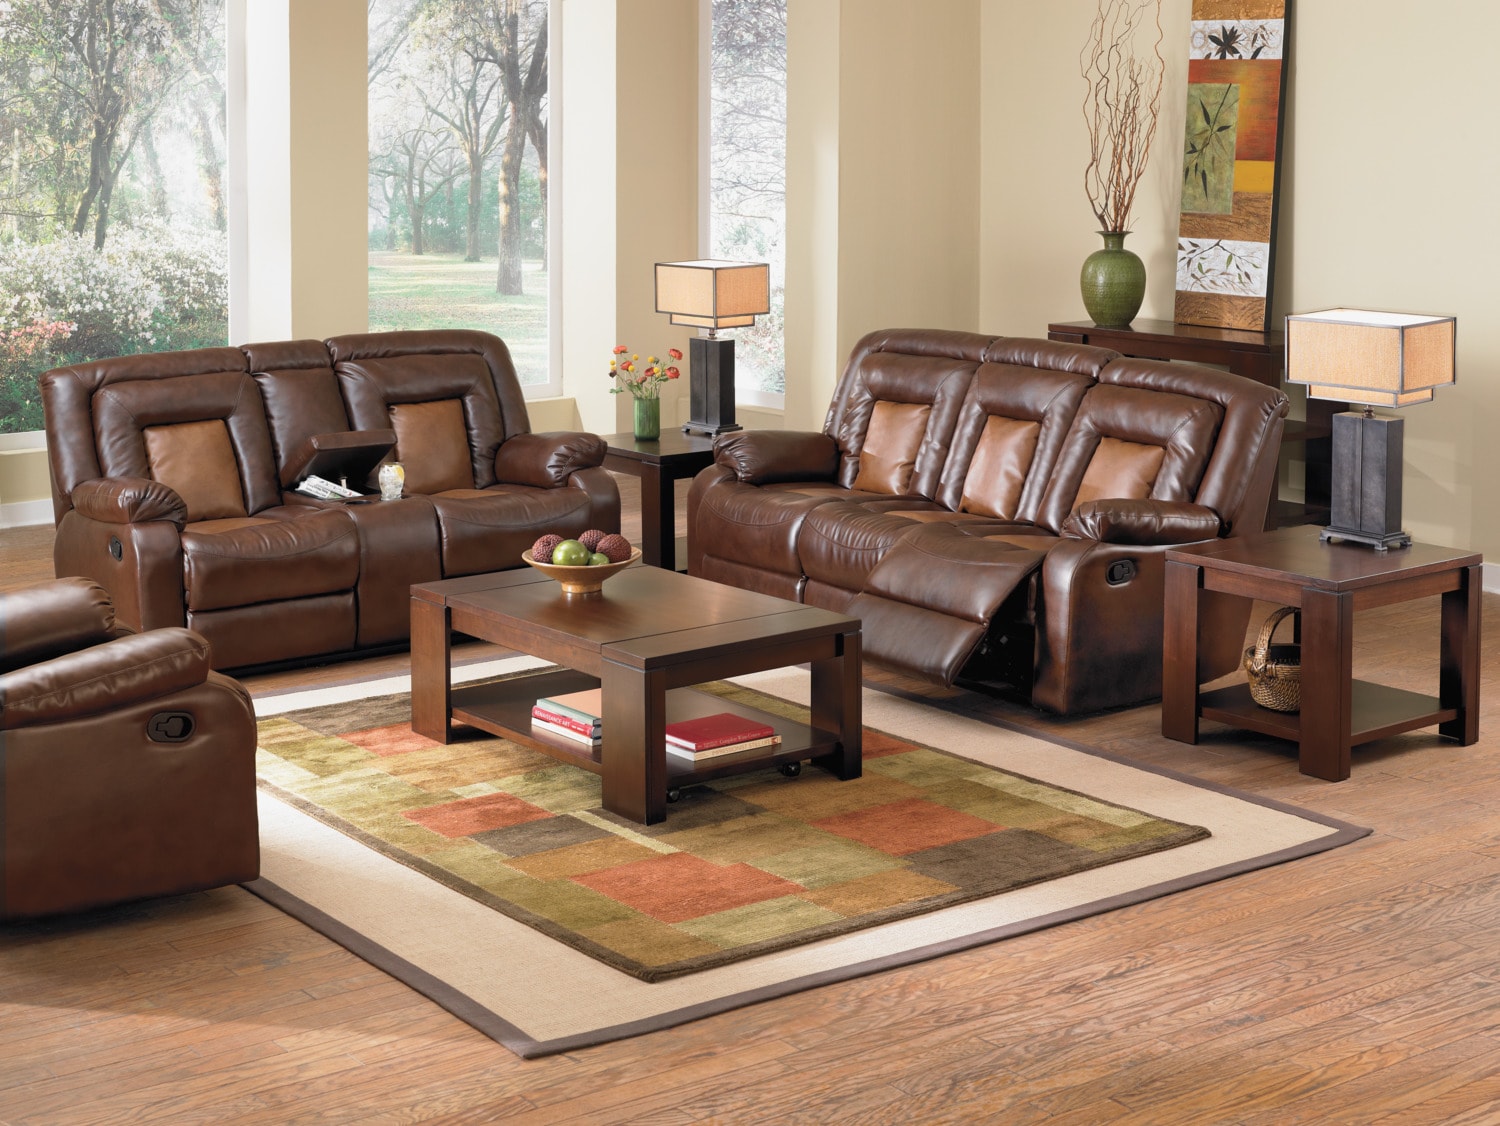 Mustang Dual-Reclining Sofa with Console - Brown | American Signature ...